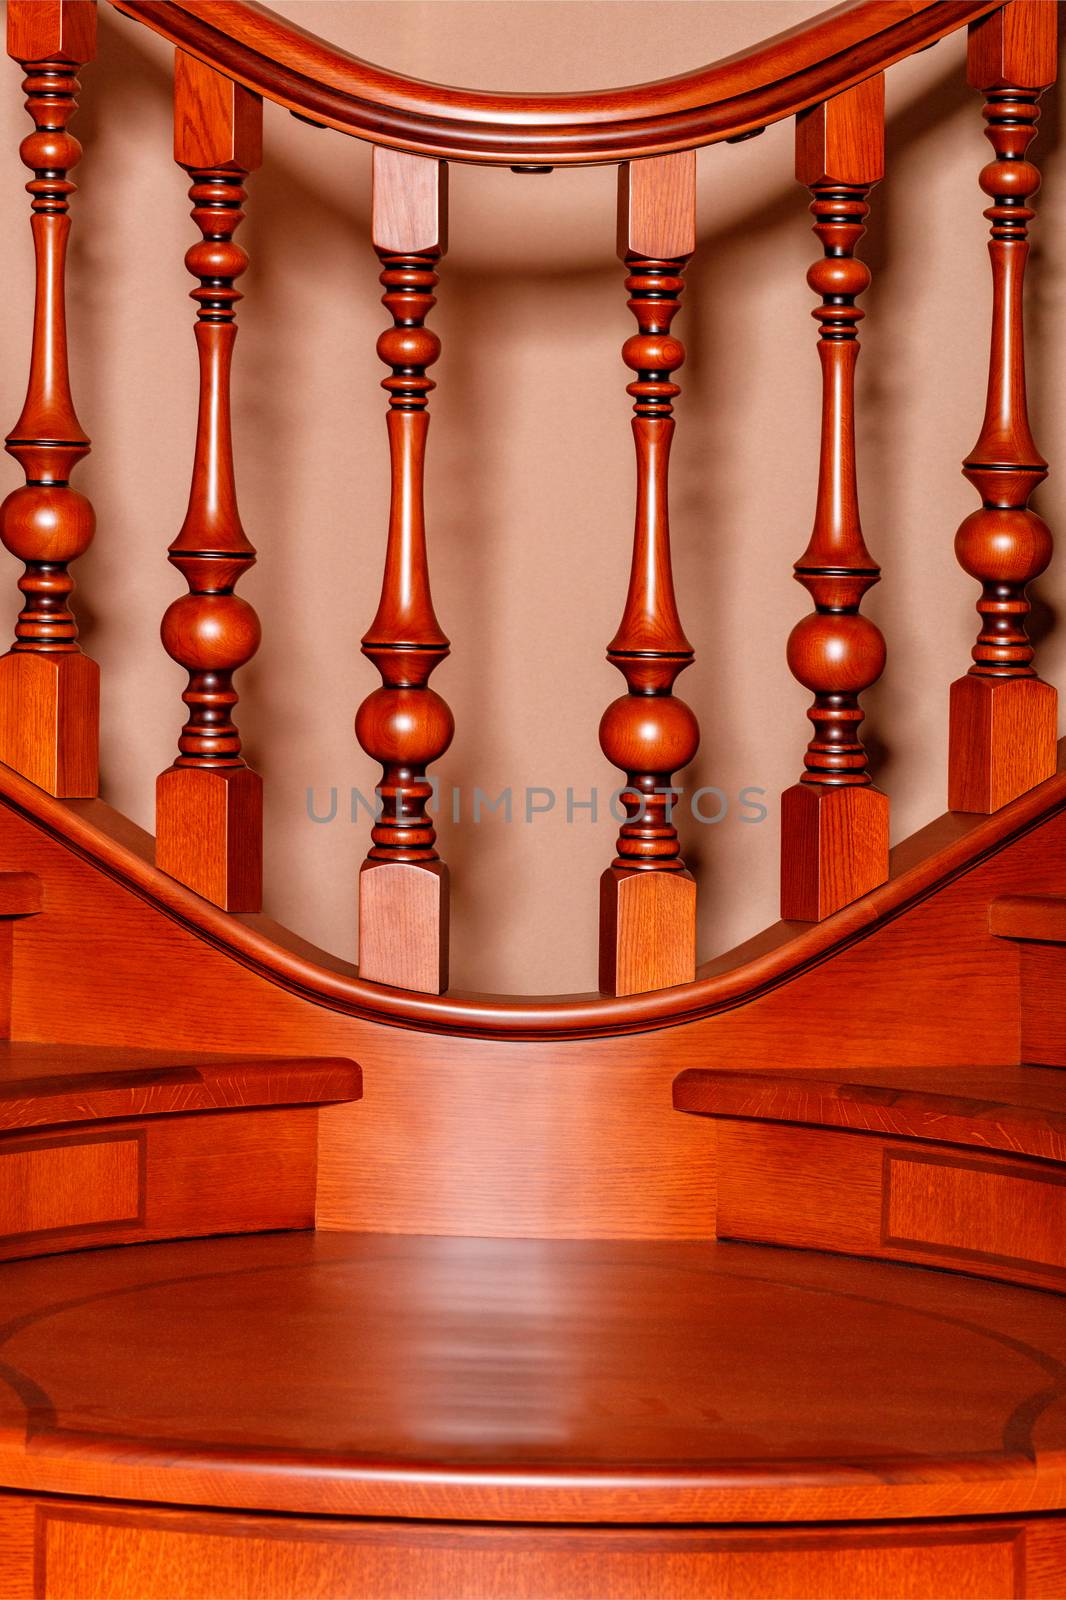 Element of a wooden staircase with carved balusters and mahogany railings. by Sergii